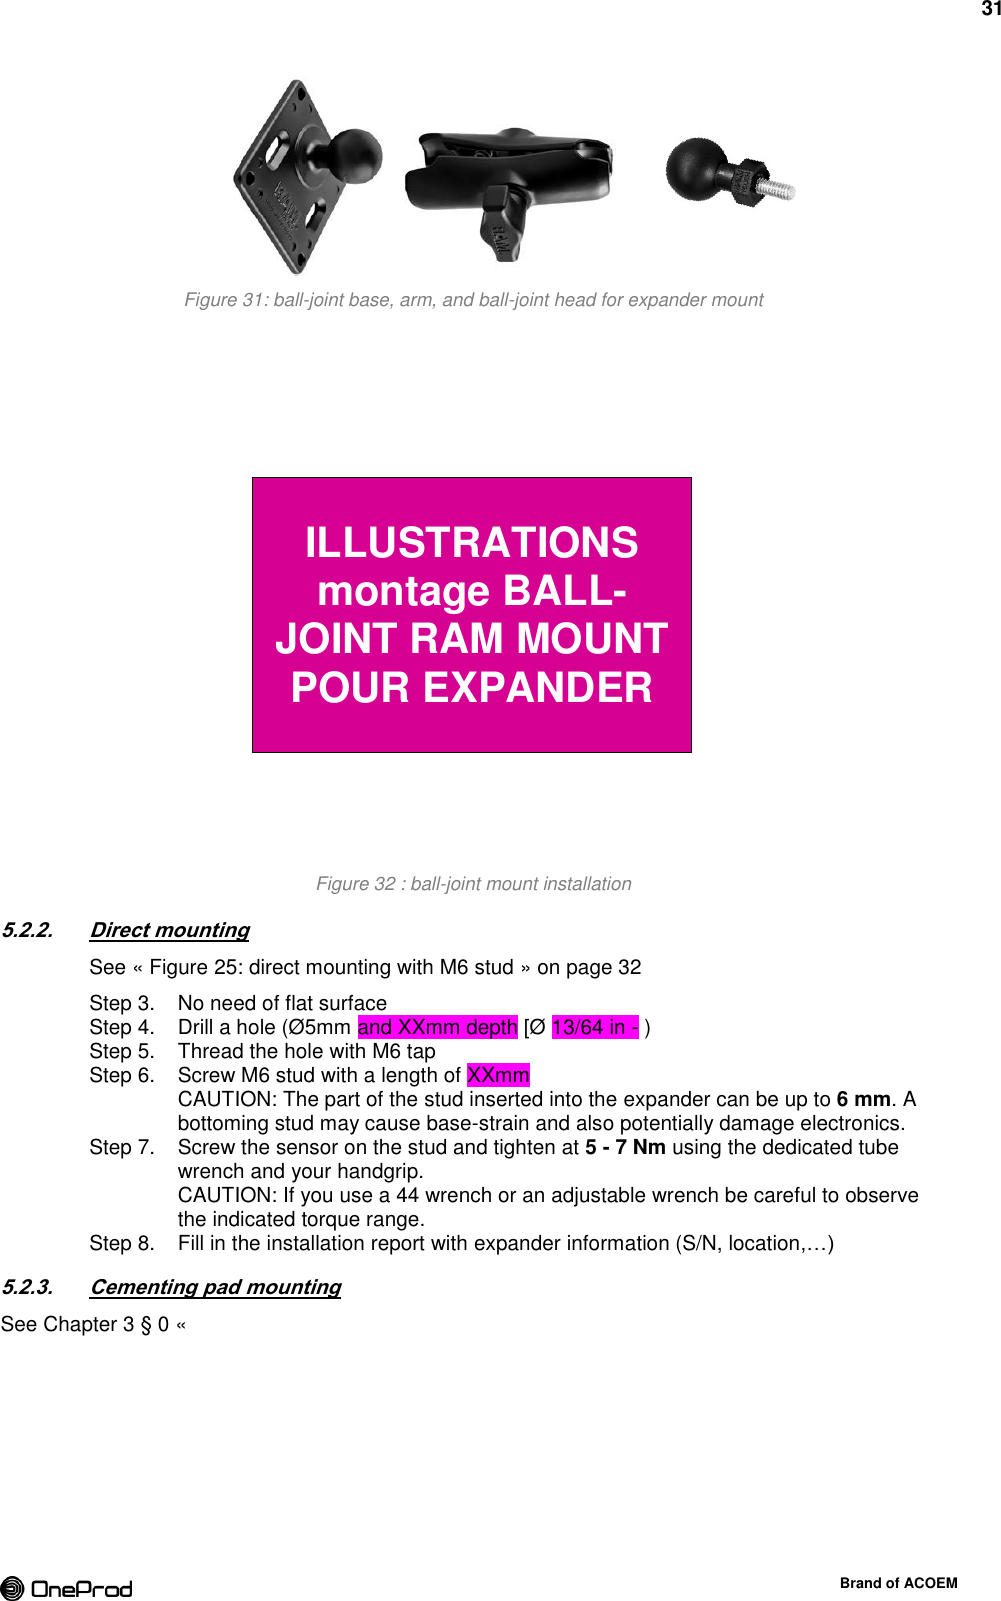 31  Brand of ACOEM  Figure 31: ball-joint base, arm, and ball-joint head for expander mount  Figure 32 : ball-joint mount installation 5.2.2. Direct mounting See « Figure 25: direct mounting with M6 stud » on page 32   No need of flat surface Step 3.  Drill a hole (Ø5mm and XXmm depth [Ø 13/64 in - ) Step 4.  Thread the hole with M6 tap Step 5.  Screw M6 stud with a length of XXmm  Step 6. CAUTION: The part of the stud inserted into the expander can be up to 6 mm. A bottoming stud may cause base-strain and also potentially damage electronics.   Screw the sensor on the stud and tighten at 5 - 7 Nm using the dedicated tube Step 7. wrench and your handgrip. CAUTION: If you use a 44 wrench or an adjustable wrench be careful to observe the indicated torque range.   Fill in the installation report with expander information (S/N, location,…) Step 8.5.2.3. Cementing pad mounting See Chapter 3 § 0 «   ILLUSTRATIONS montage BALL-JOINT RAM MOUNT POUR EXPANDER 